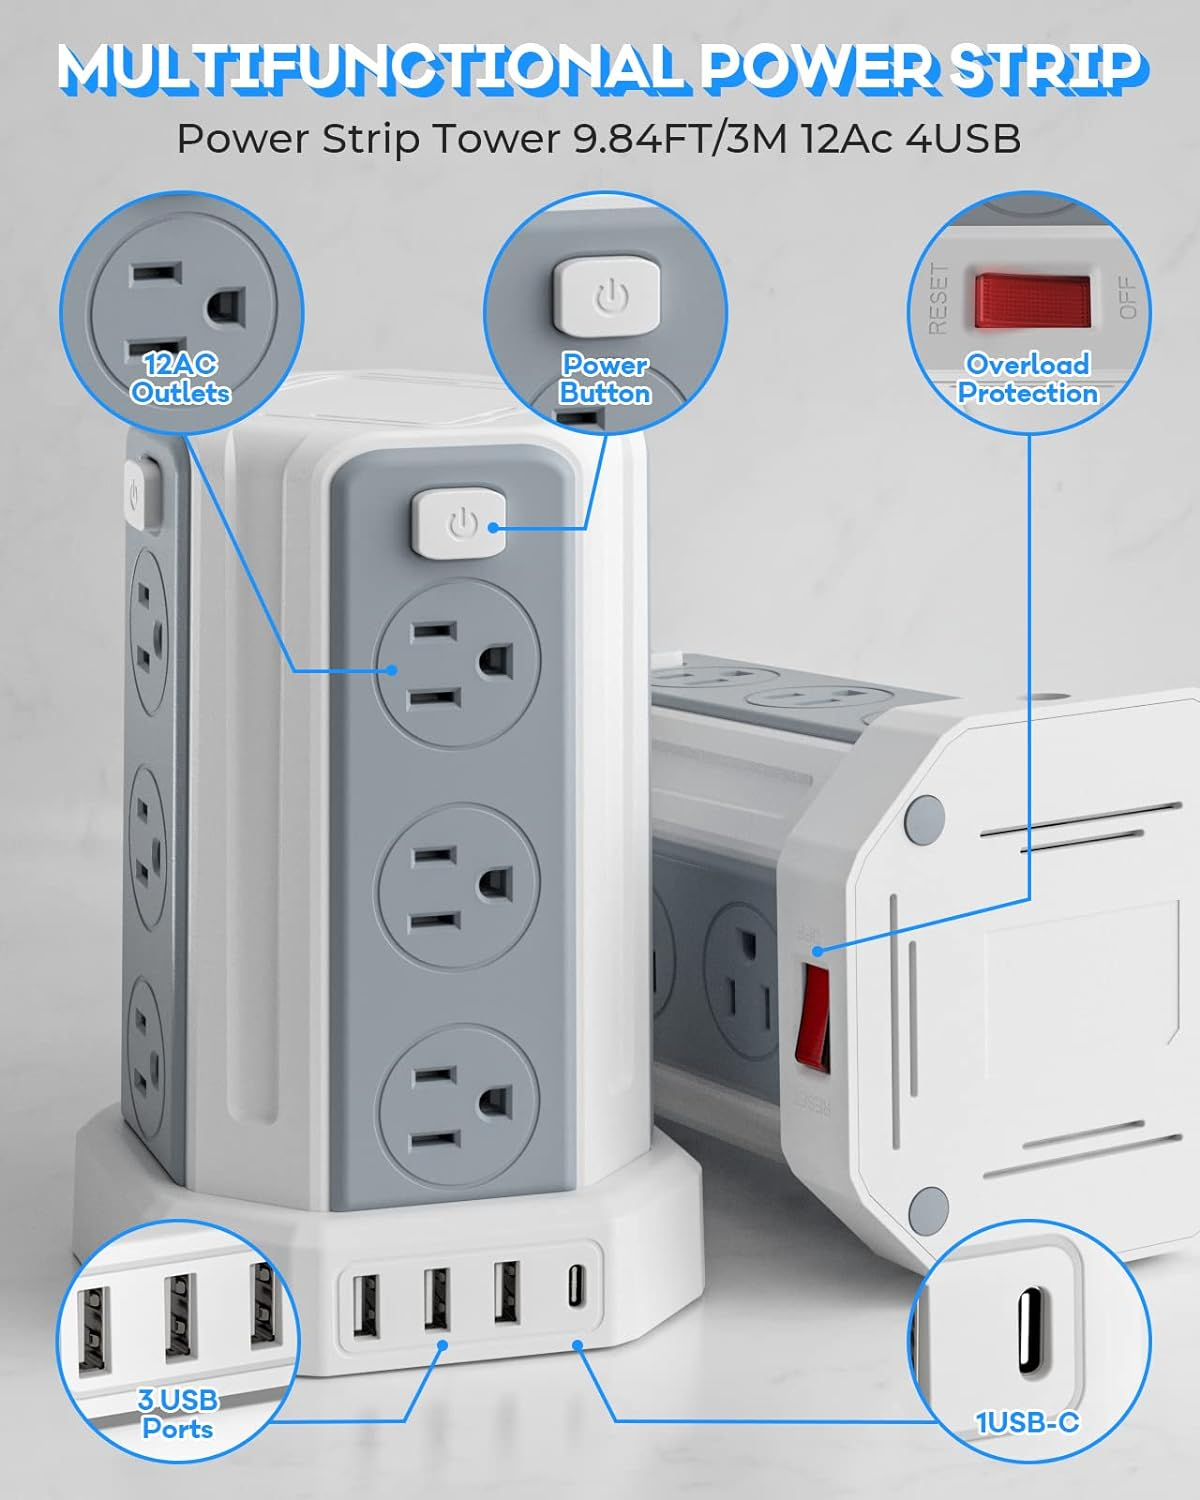 Homultuin Power Strip Surge Protector 12 AC Outlets 4 USB Ports (1 USB C) Power Strip with USB 10 FT Extension Cord Power Strip Tower Overload Protection, Outlet Surge Protector Suitable for Home Office